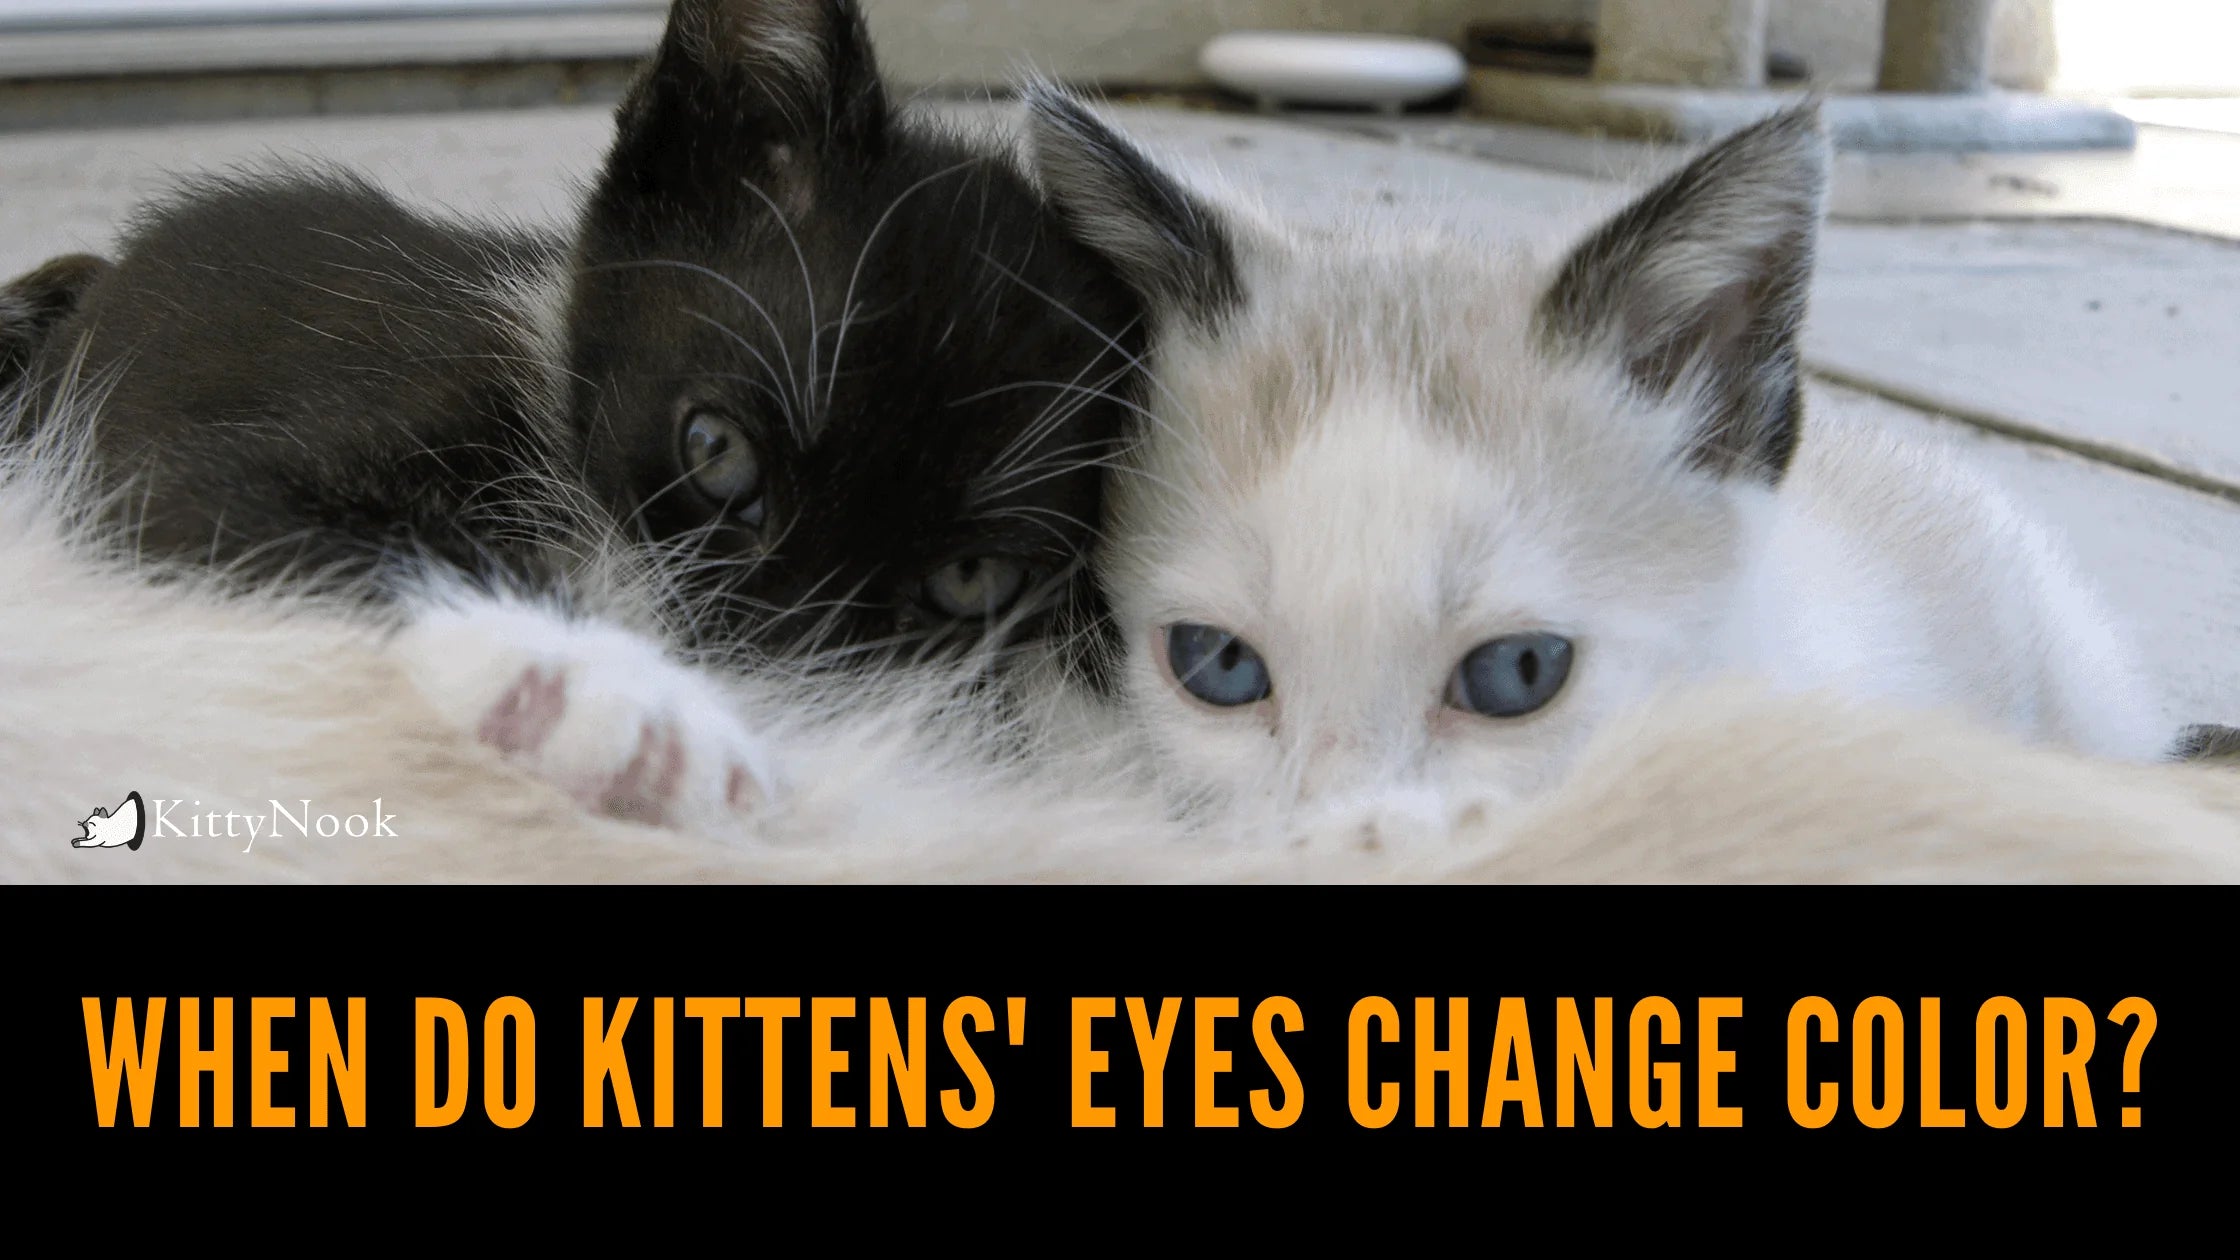 When Do Kittens' Eyes Change Color? - KittyNook Cat Company